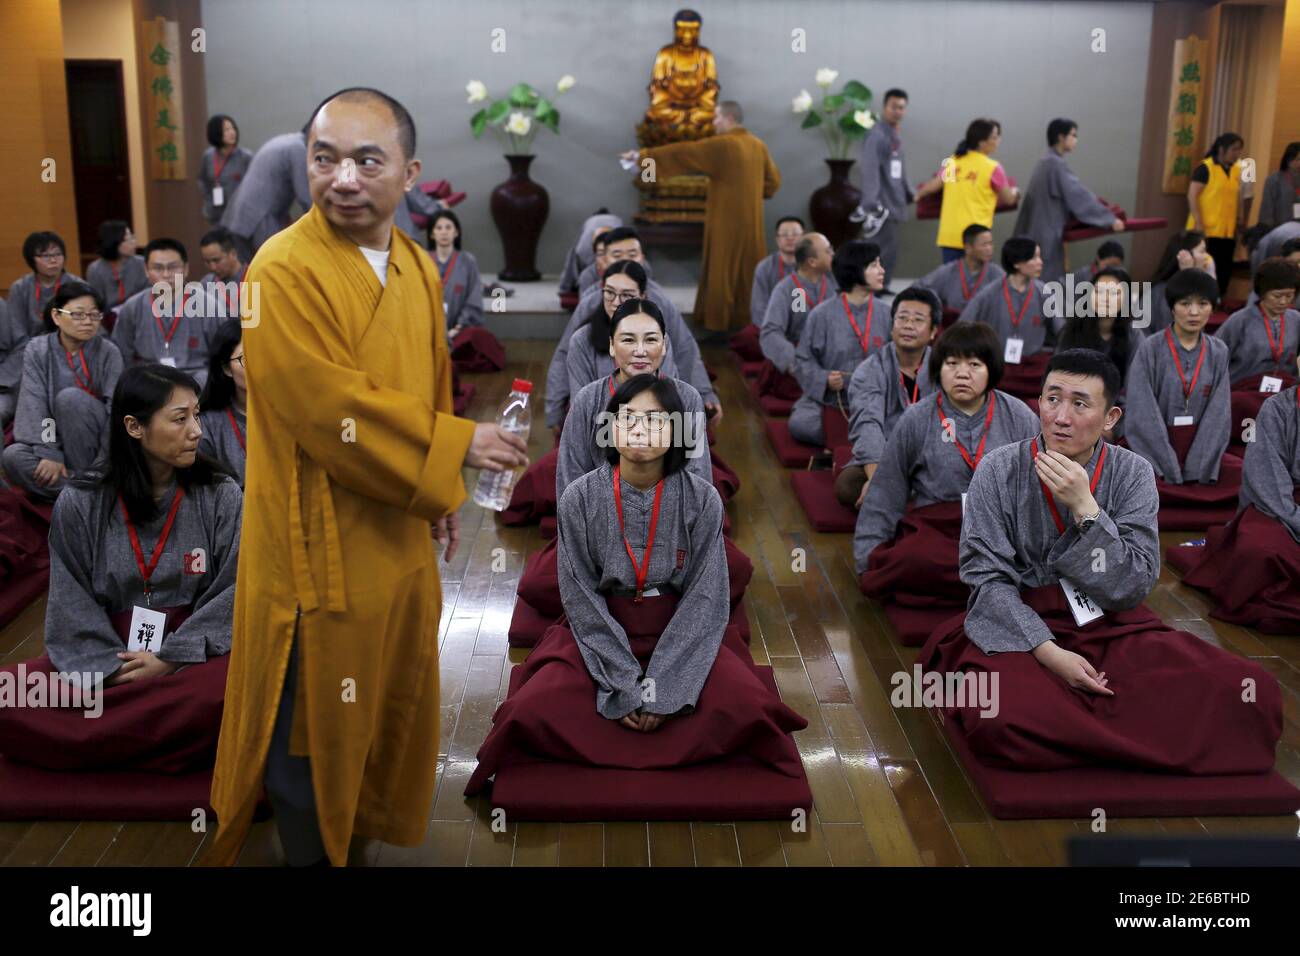 A Buddhist monk stands in front of participants attending a class at Yufo Buddhism Temple in Shanghai, China, July 8, 2015. About 70 Shanghai residents took part in the two-day 'zen' class at the temple on Wednesday, which required them to lock away their mobile phones, tablet devices and other belongings so that they could concentrate on the study of Buddhism. Over 500 people has signed up for these classes which are organised by the temple for free, local media reported. REUTERS/Aly Song TPX IMAGES OF THE DAY Stock Photo